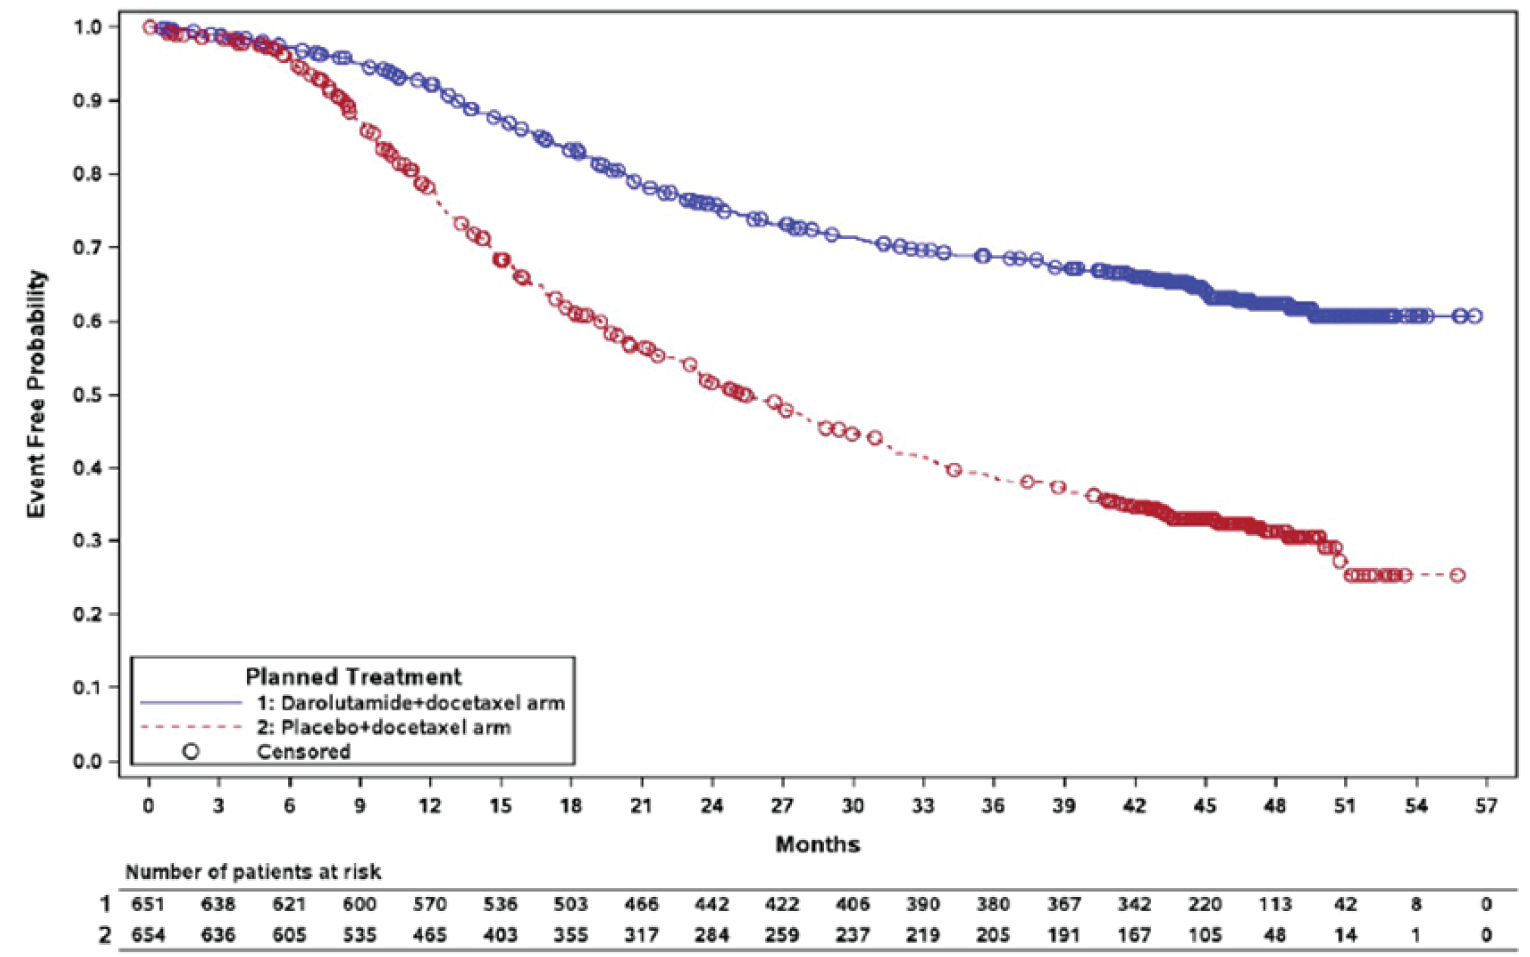 Kaplan-Meier curve of time to initiation of subsequent antineoplastic therapy for the darolutamide plus docetaxel and ADT arm and the placebo plus docetaxel and ADT arm from 0 to 57 months of follow-up. The curves diverge at 6 months, with the darolutamide plus docetaxel and ADT arm having a higher event-free probability than the placebo plus docetaxel and ADT arm. The curves remain separated until longest follow-up at 57 months.